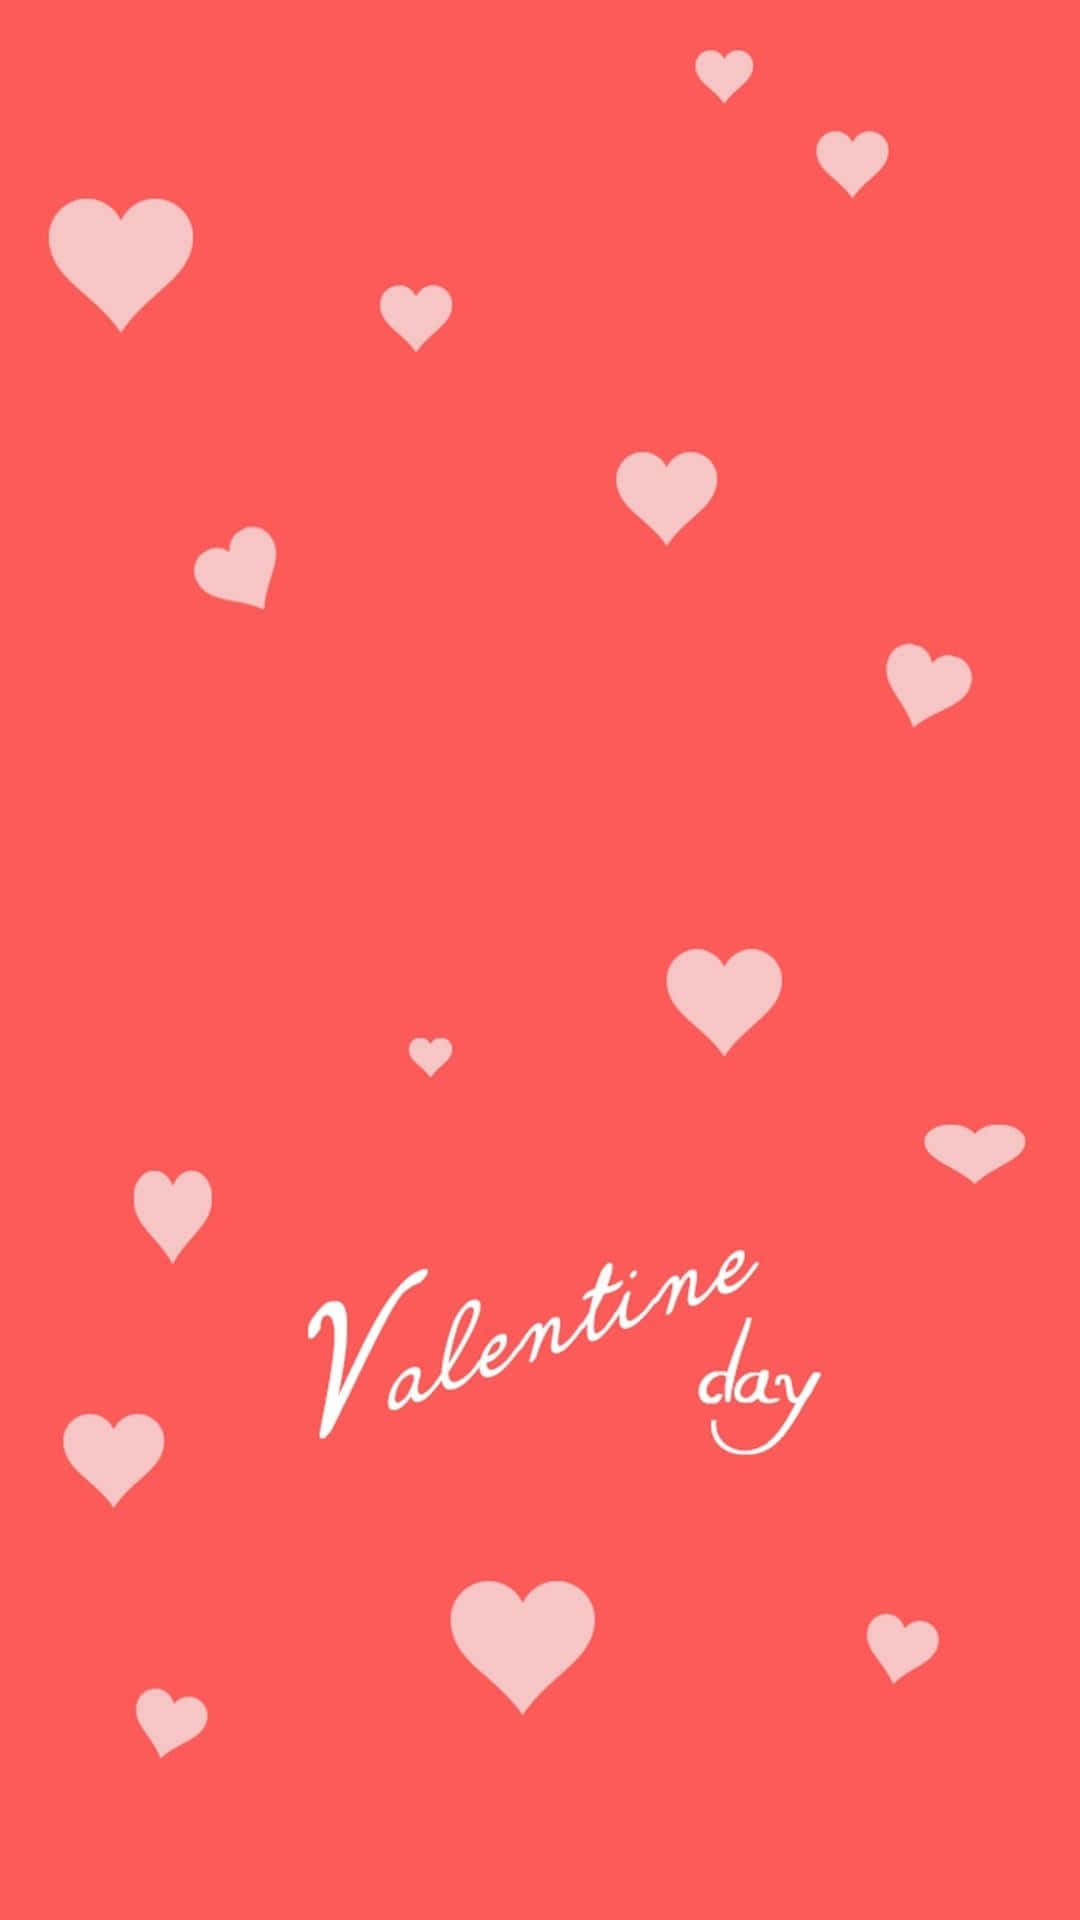 100+] Valentines Day Phone Wallpapers